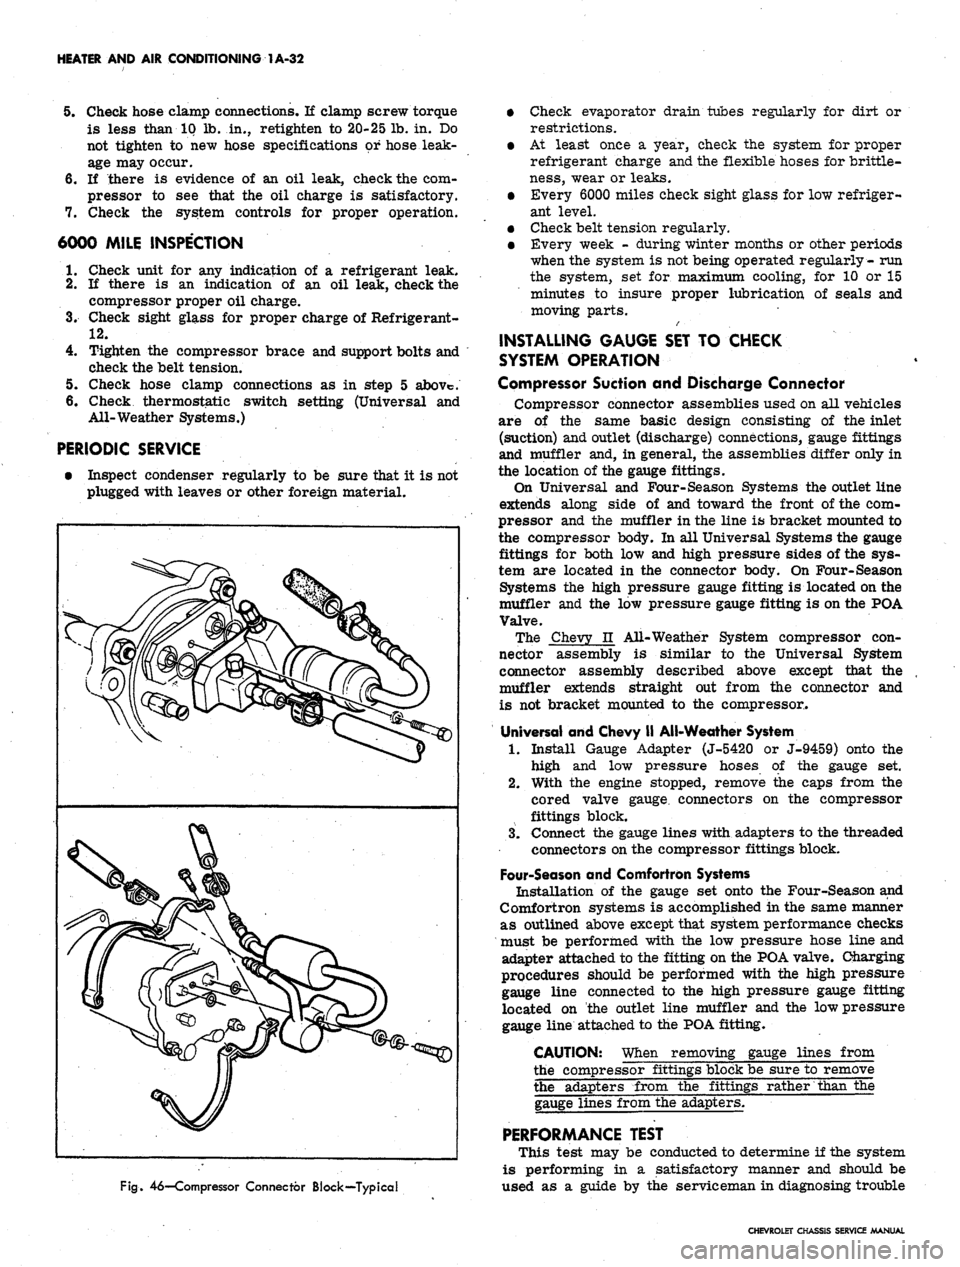 CHEVROLET CAMARO 1967 1.G Chassis Workshop Manual 
HEATER AND AIR CONDITIONING 1A-32

5.
 Check hose clamp connections. If clamp screw torque

is less than 10 lb. in., retighten to 20-25 lb. in. Do

not tighten to new hose specifications or hose leak